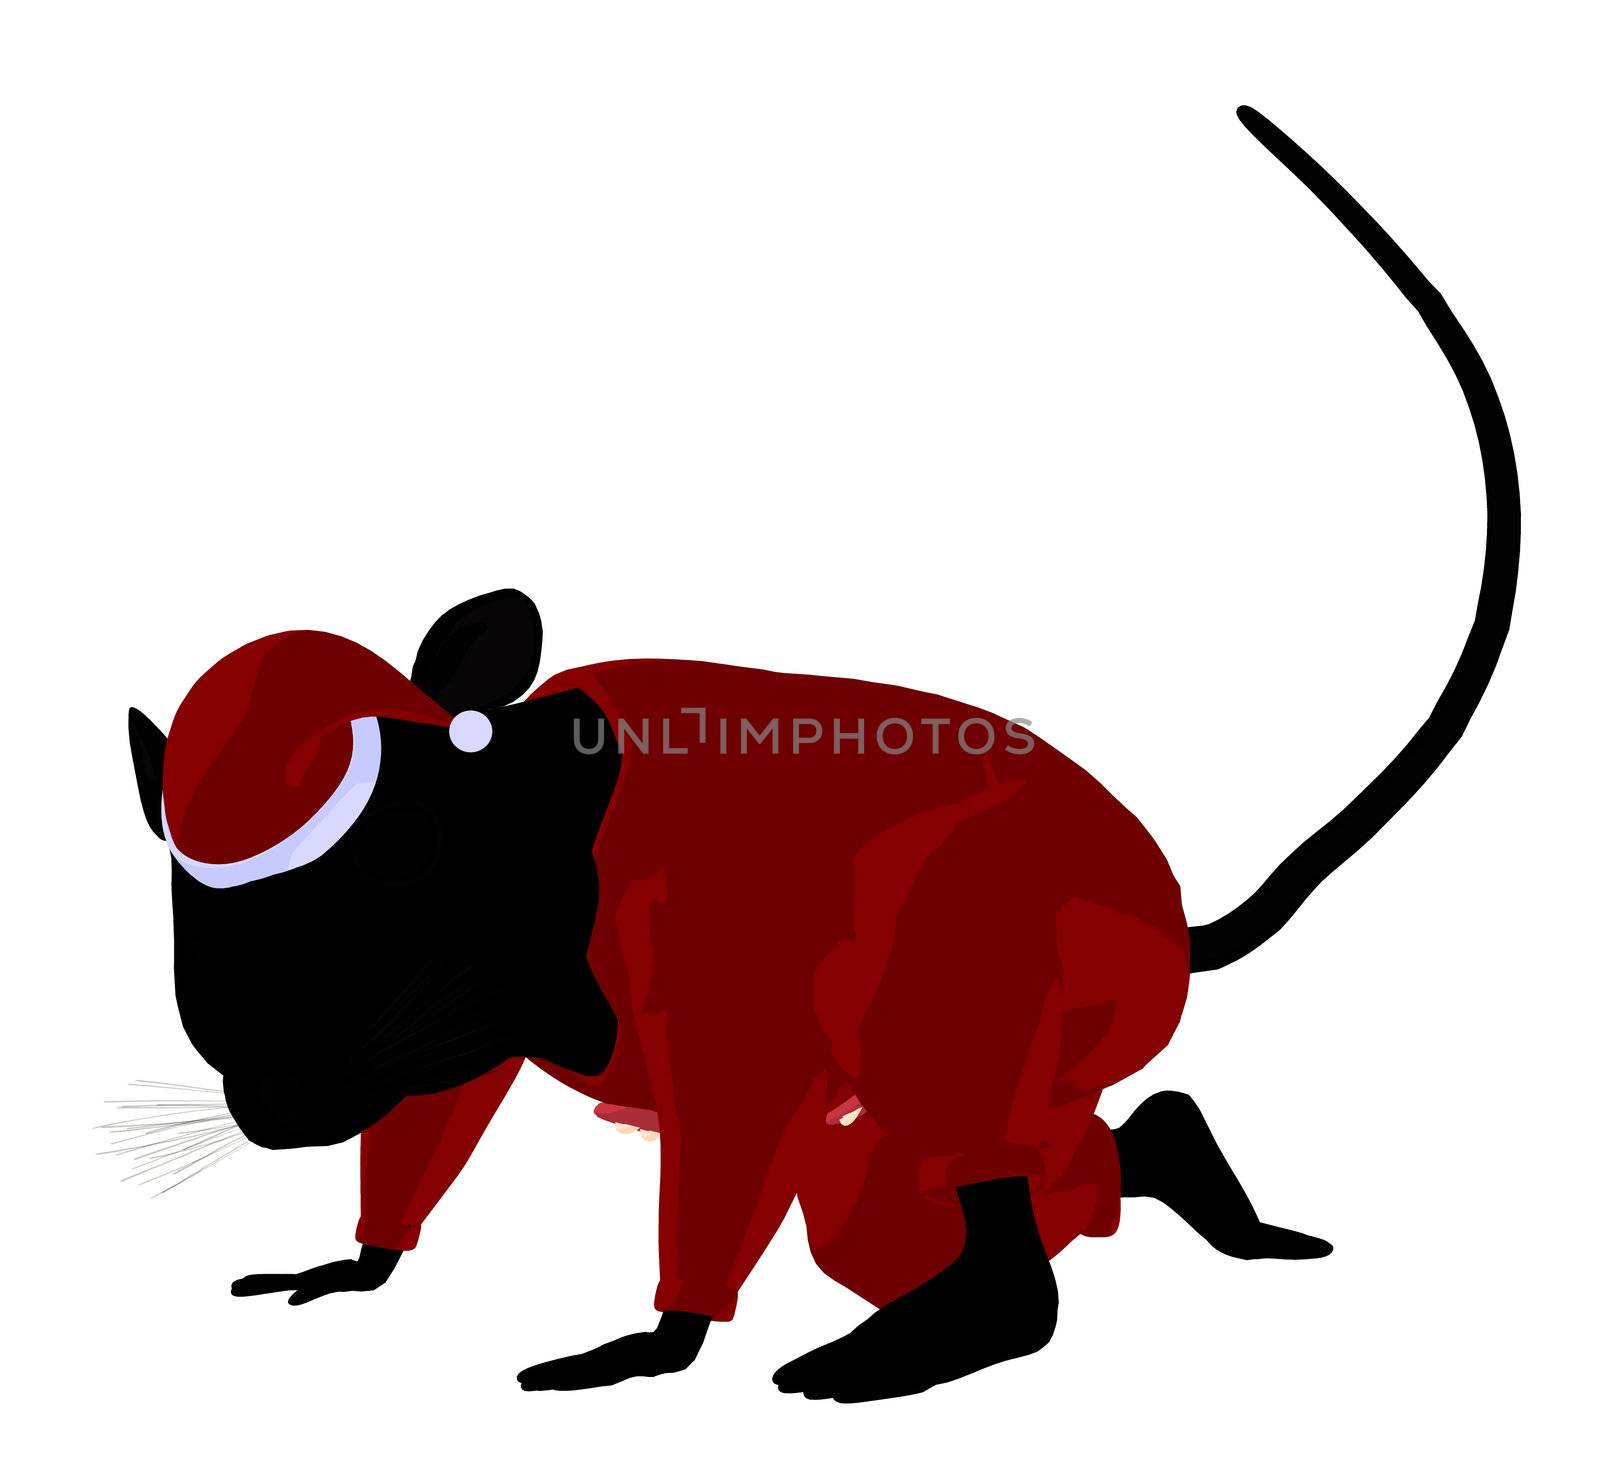 Christmas mouse wearing a santa hat silhouette illustration on a white background